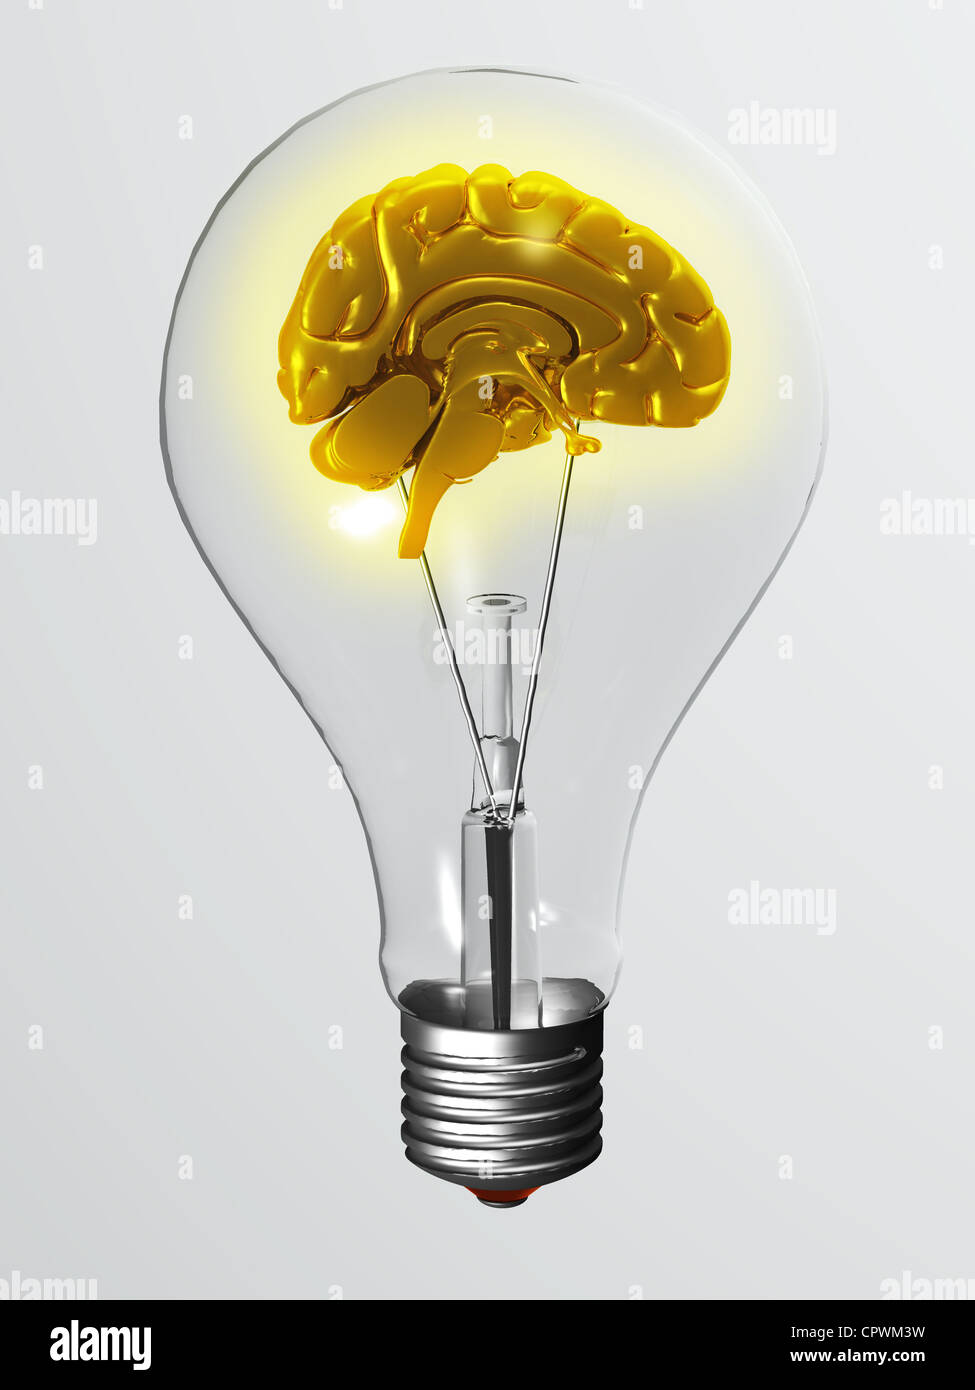 illustration of a brain within a light bulb Stock Photo